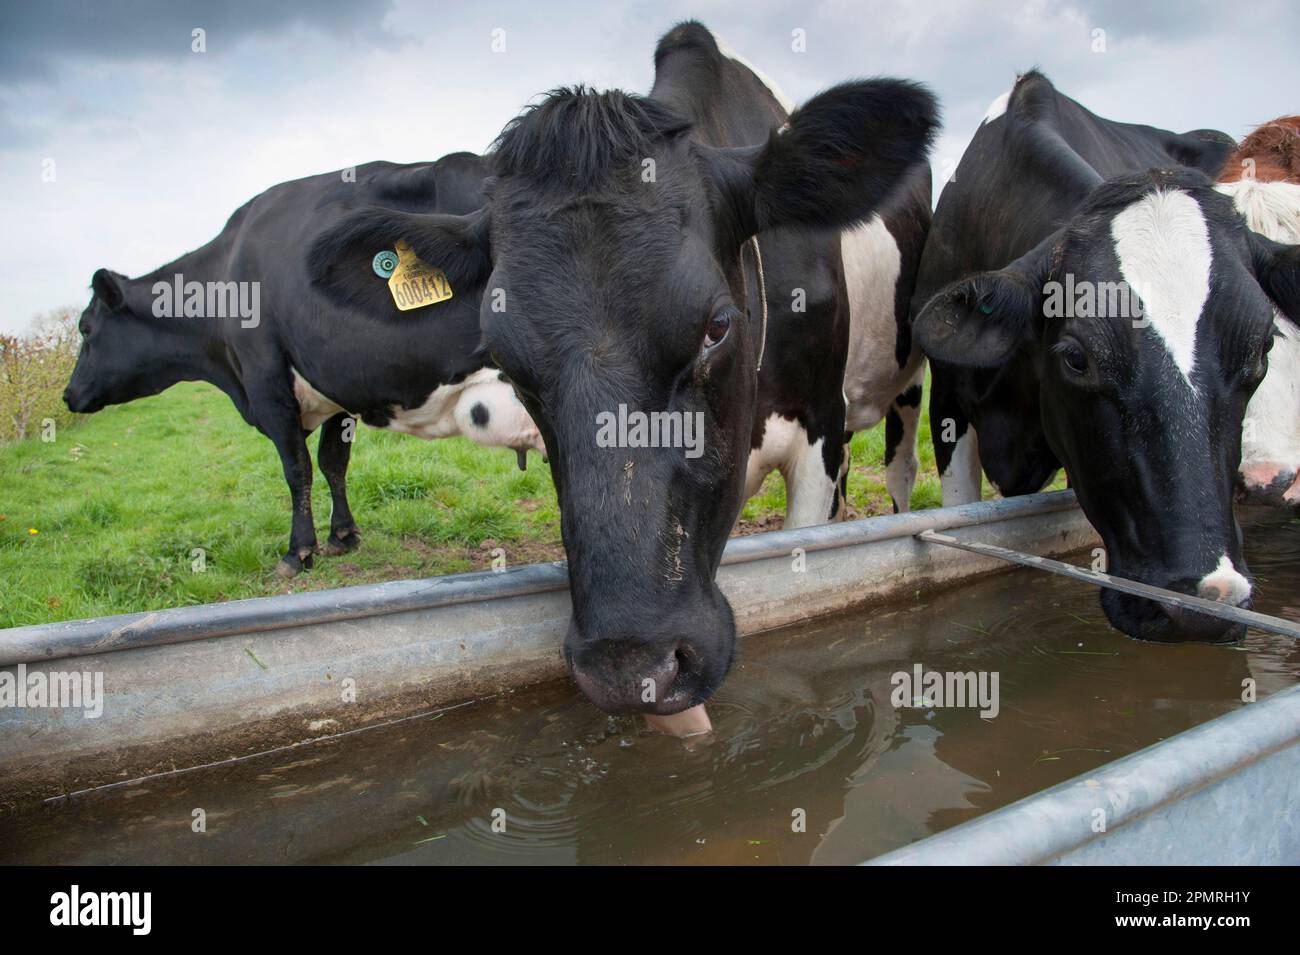 Domestic Cattle, Holstein dairy cows, herd drinking from water trough in pasture, Cheshire, England, United Kingdom Stock Photo